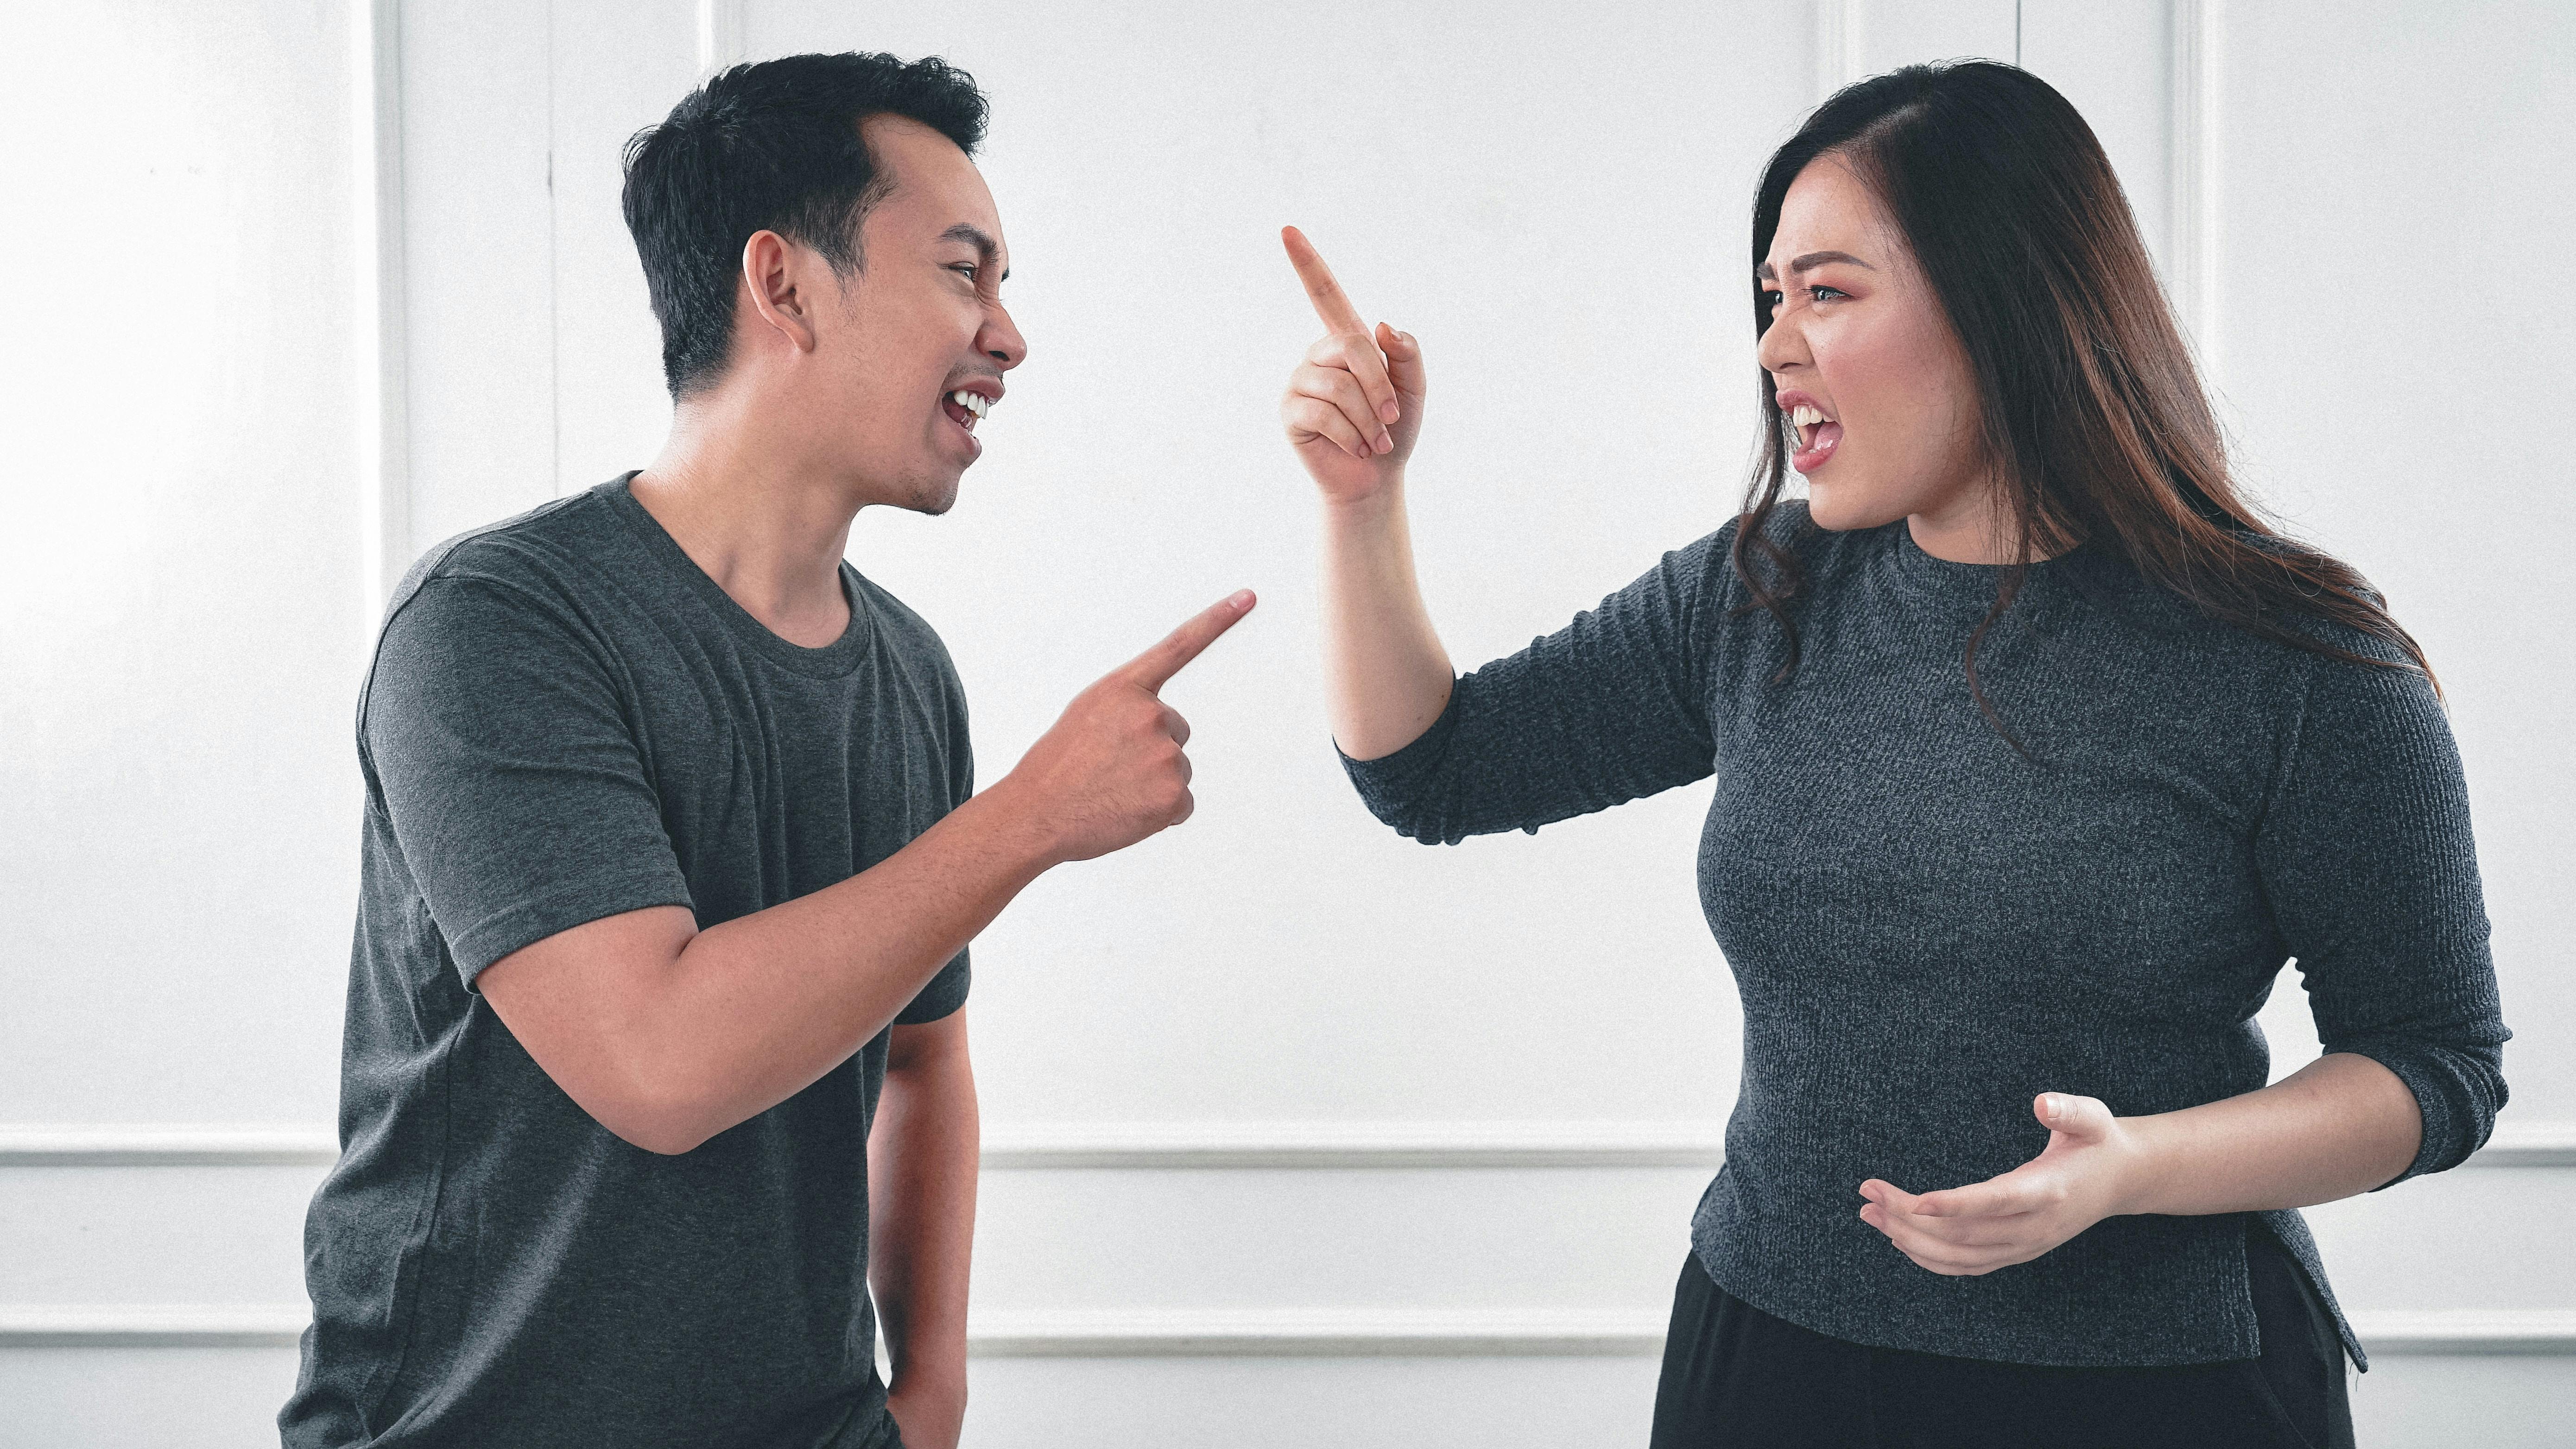 A man and a woman arguing and pointing fingers at each other